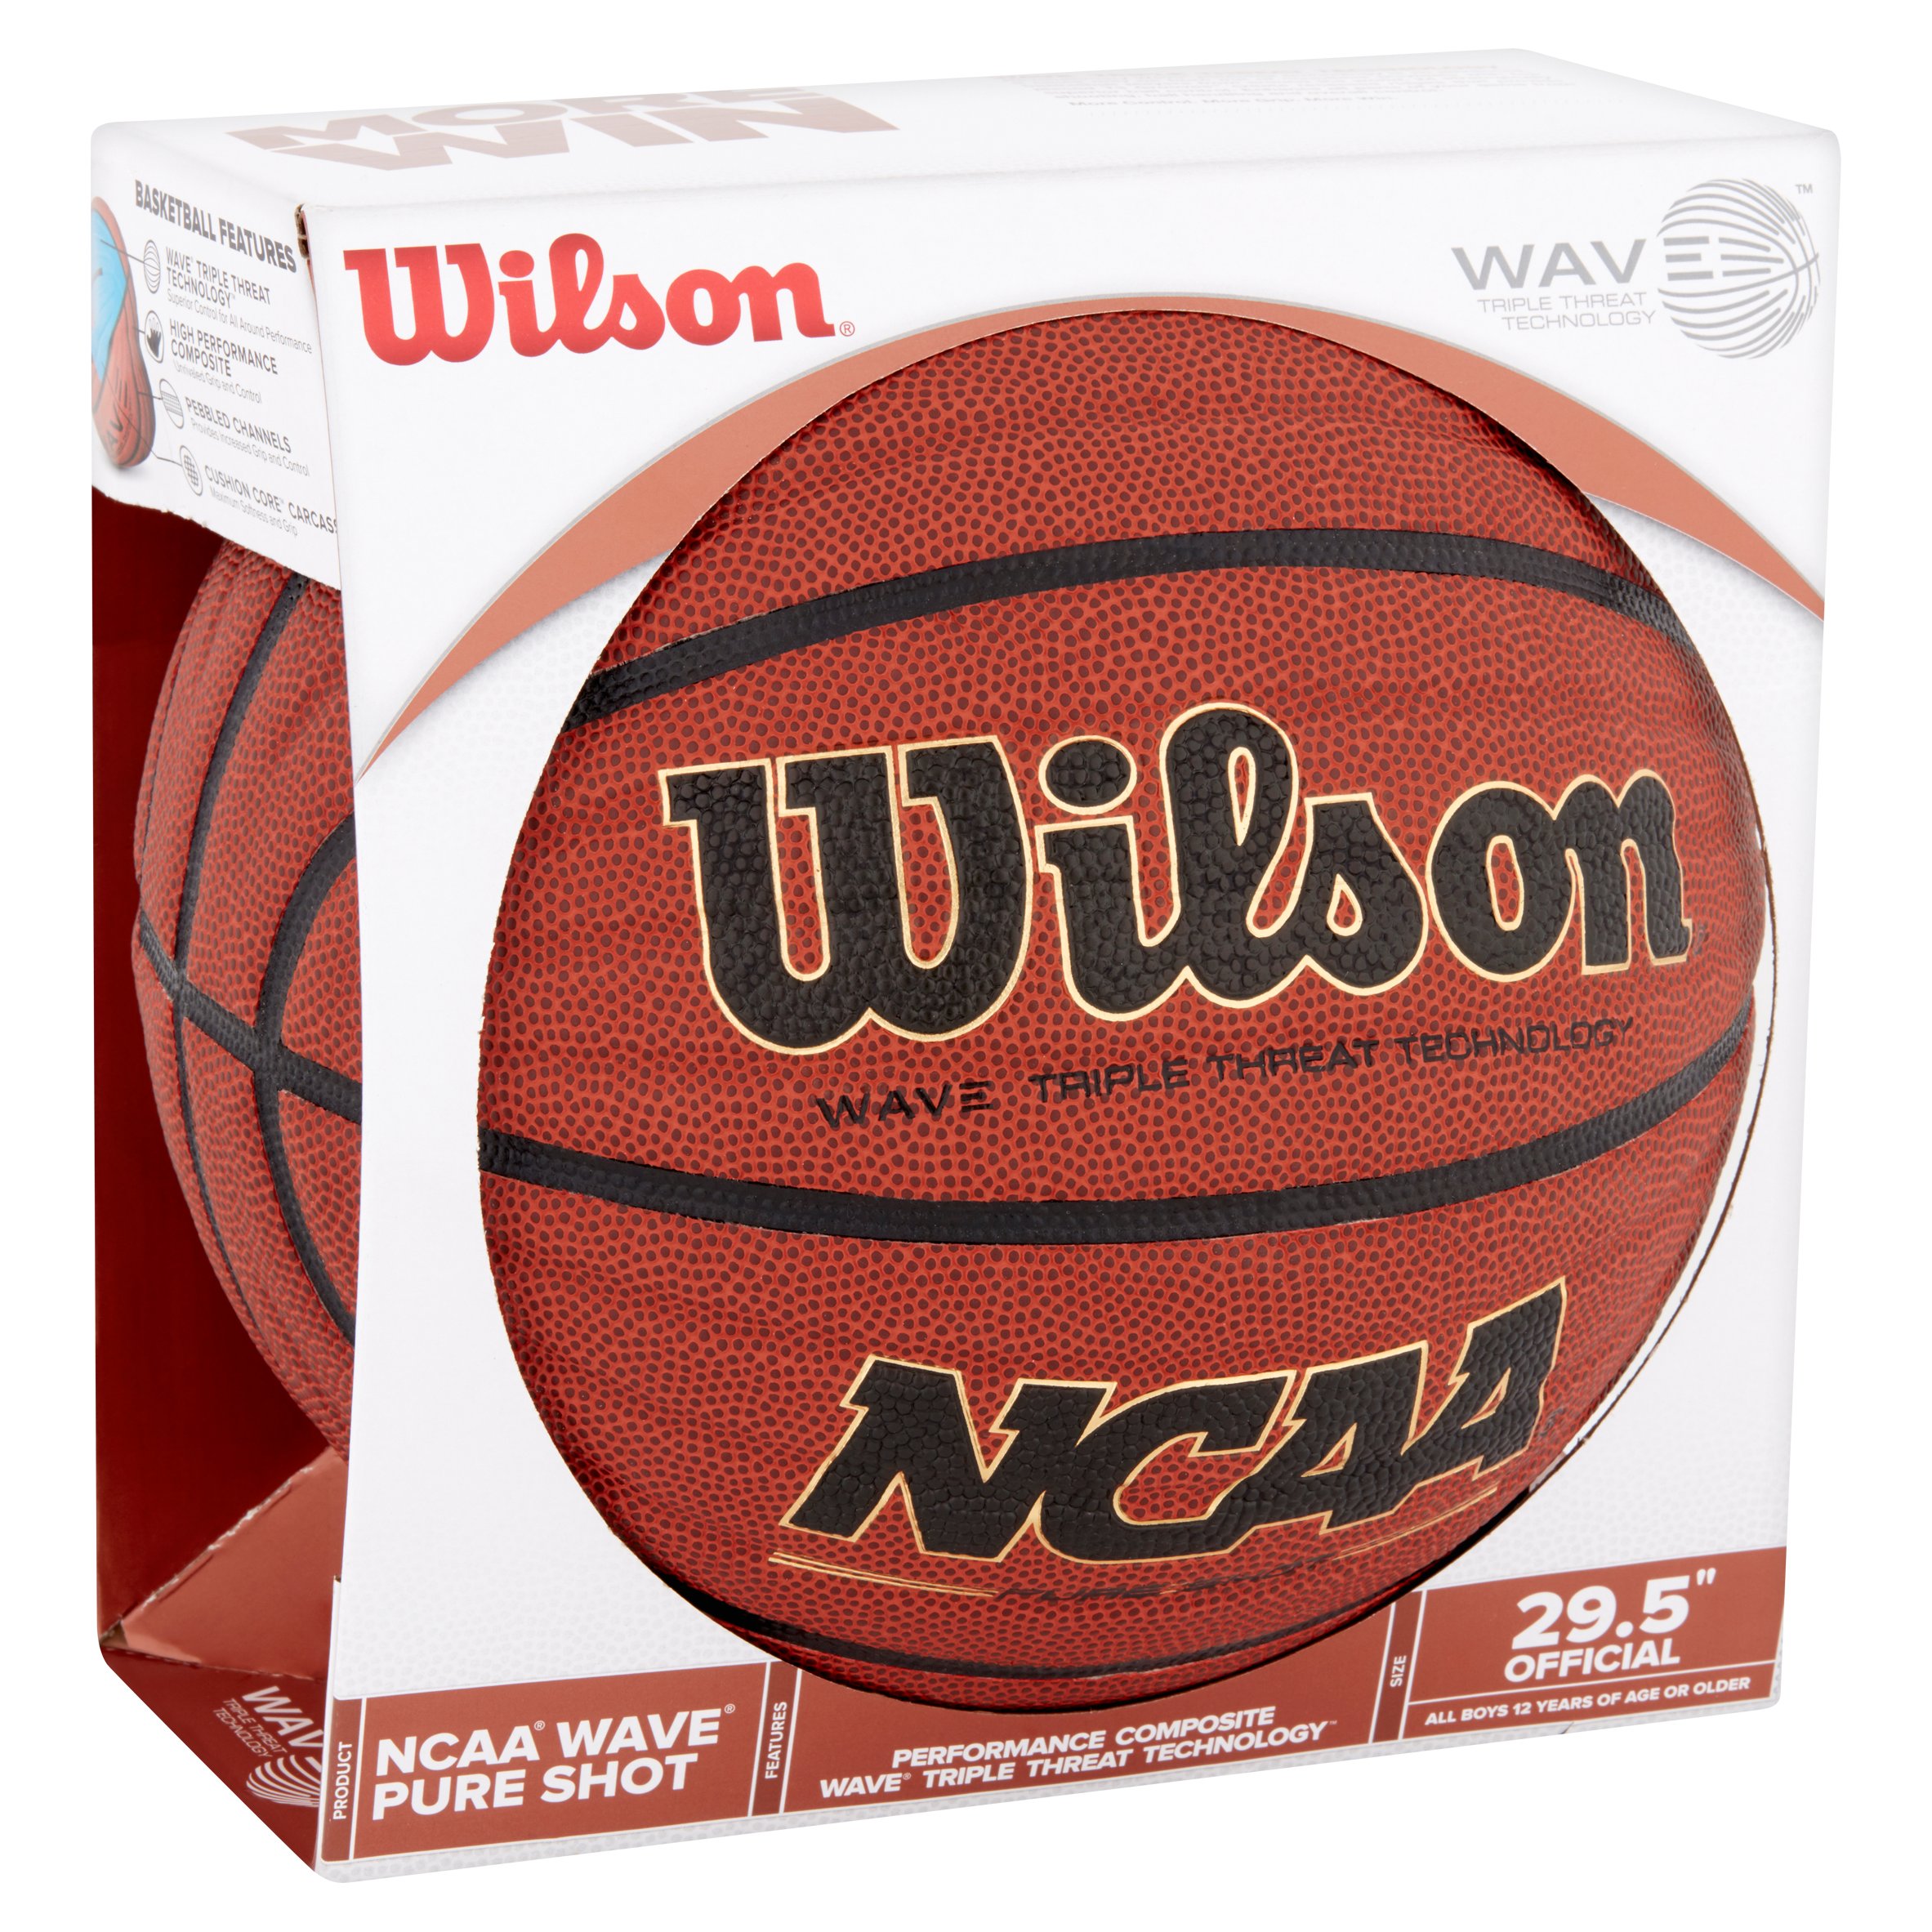 Wilson NCAA Wave Basketball, Official Size (29.5") - image 2 of 2